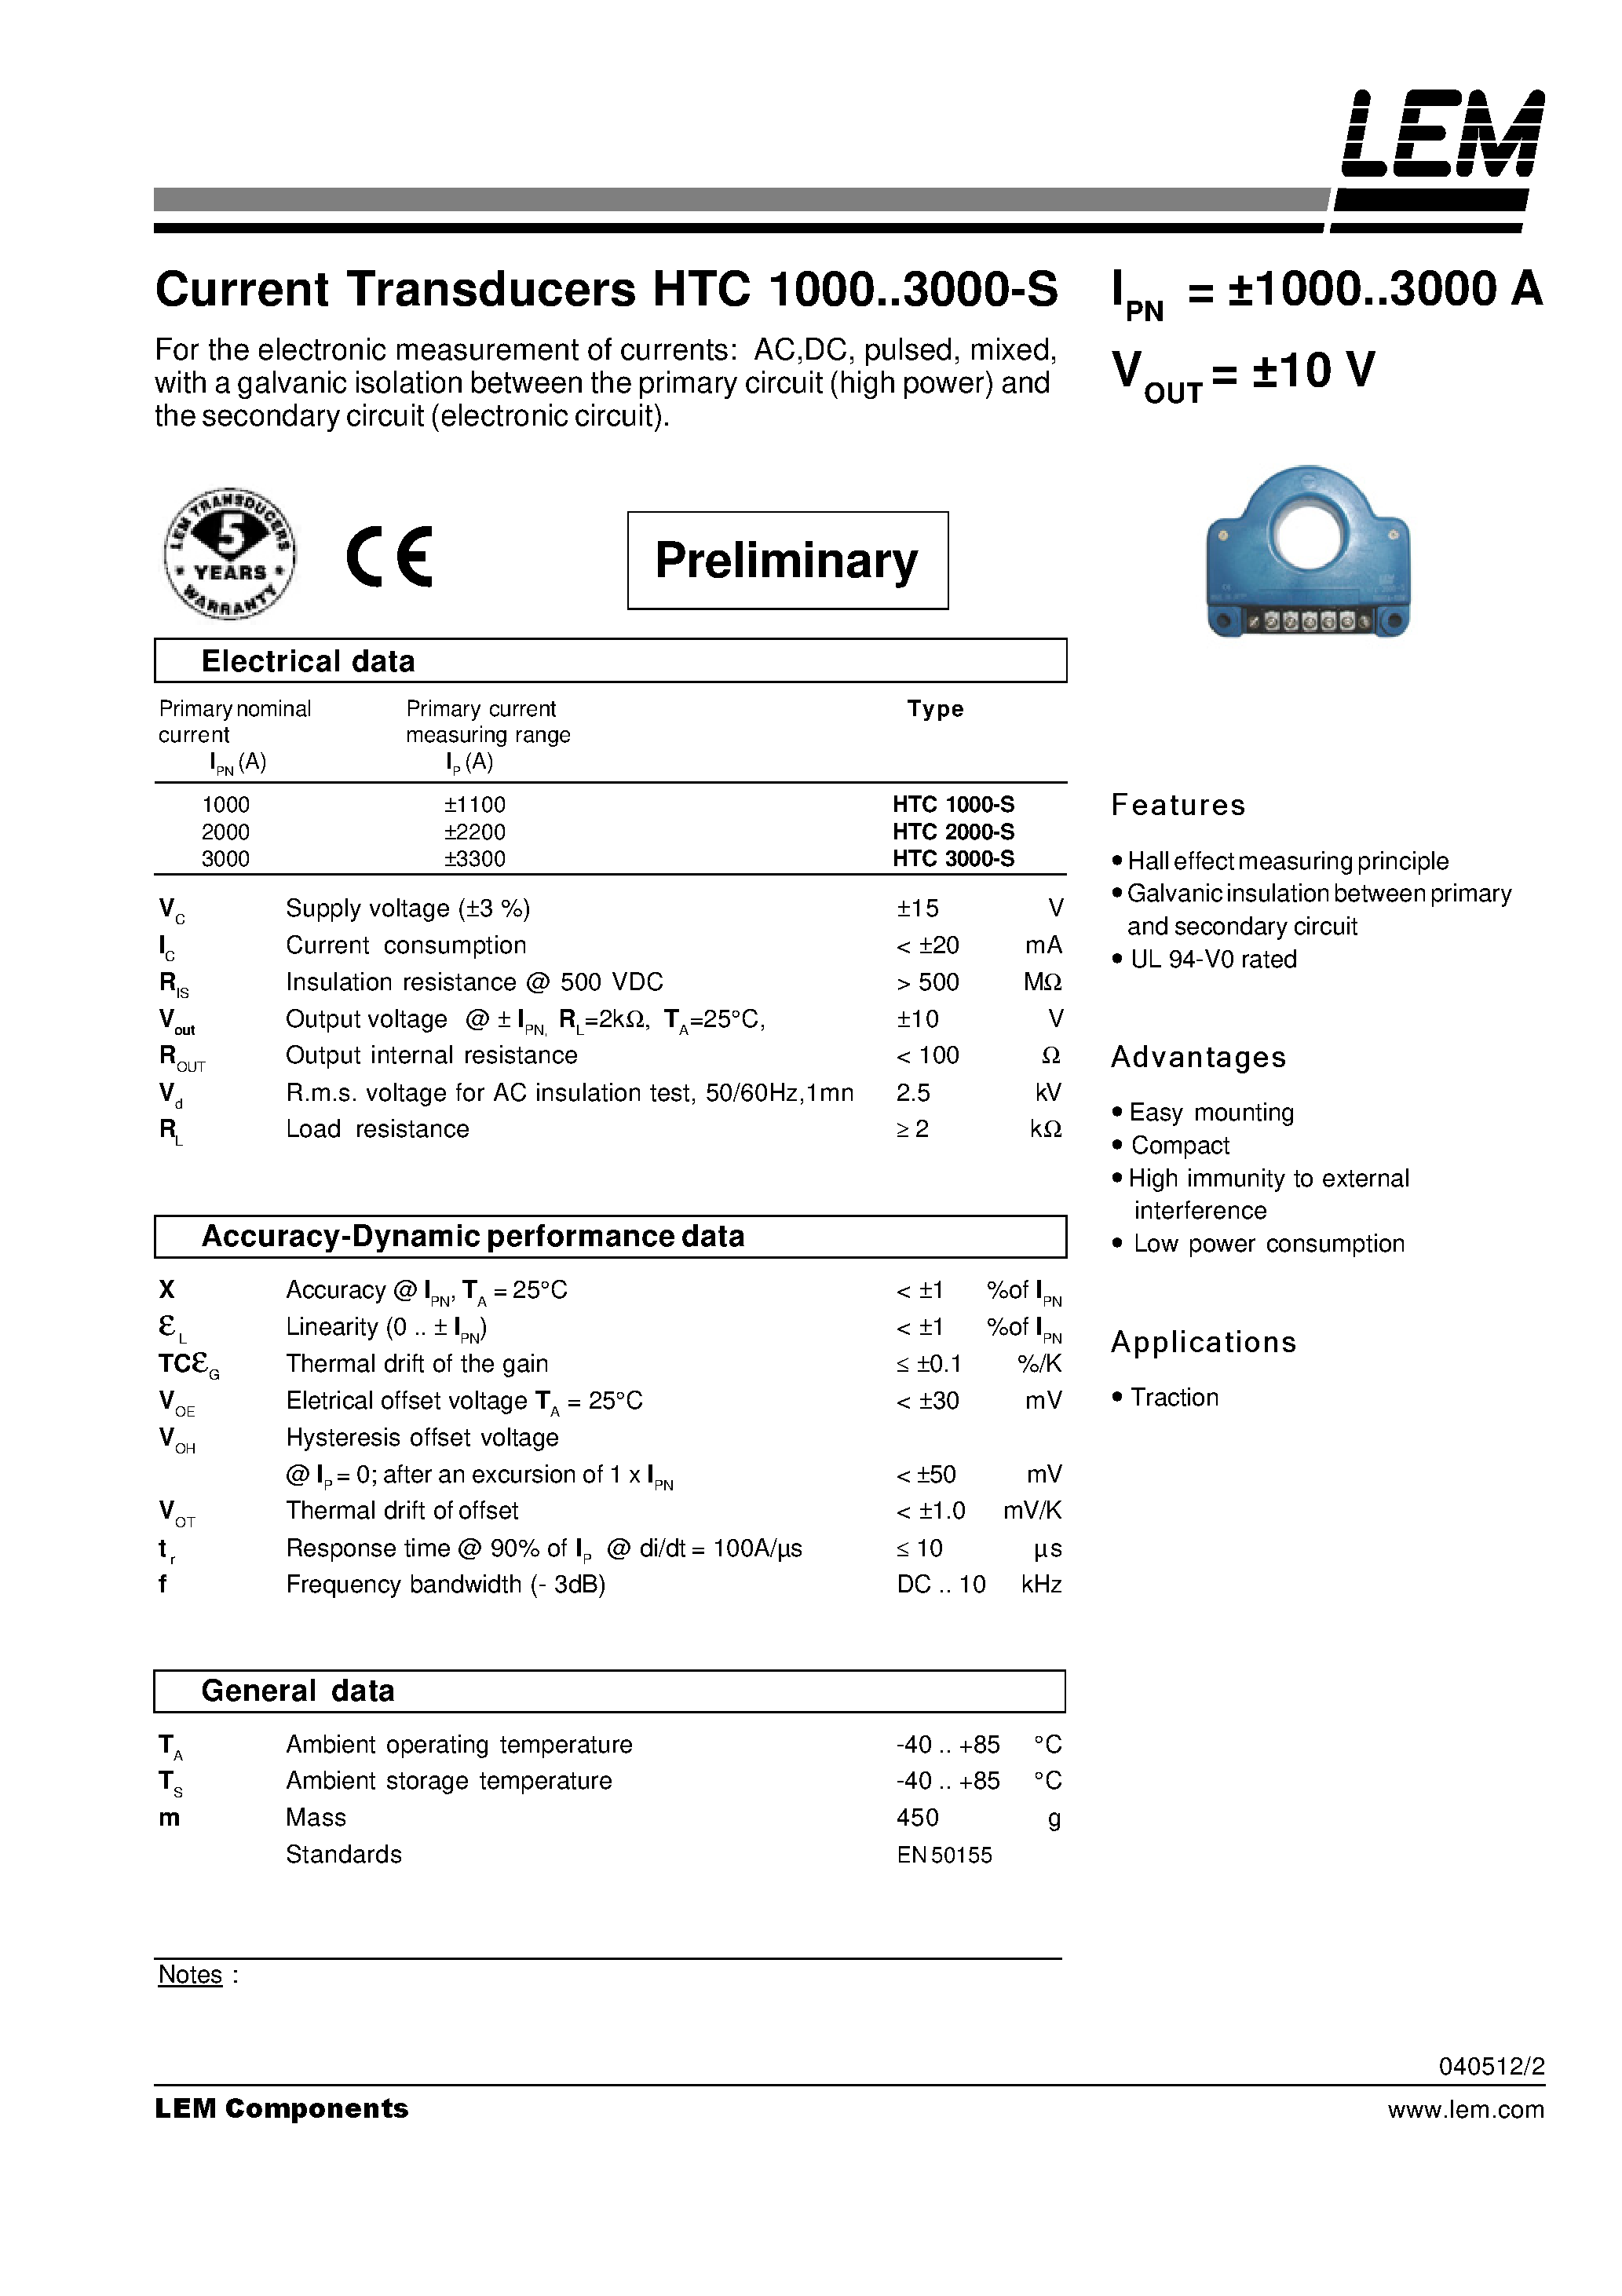 Datasheet HTC2000-S - Current Transducers HTC 1000~3000-S page 1